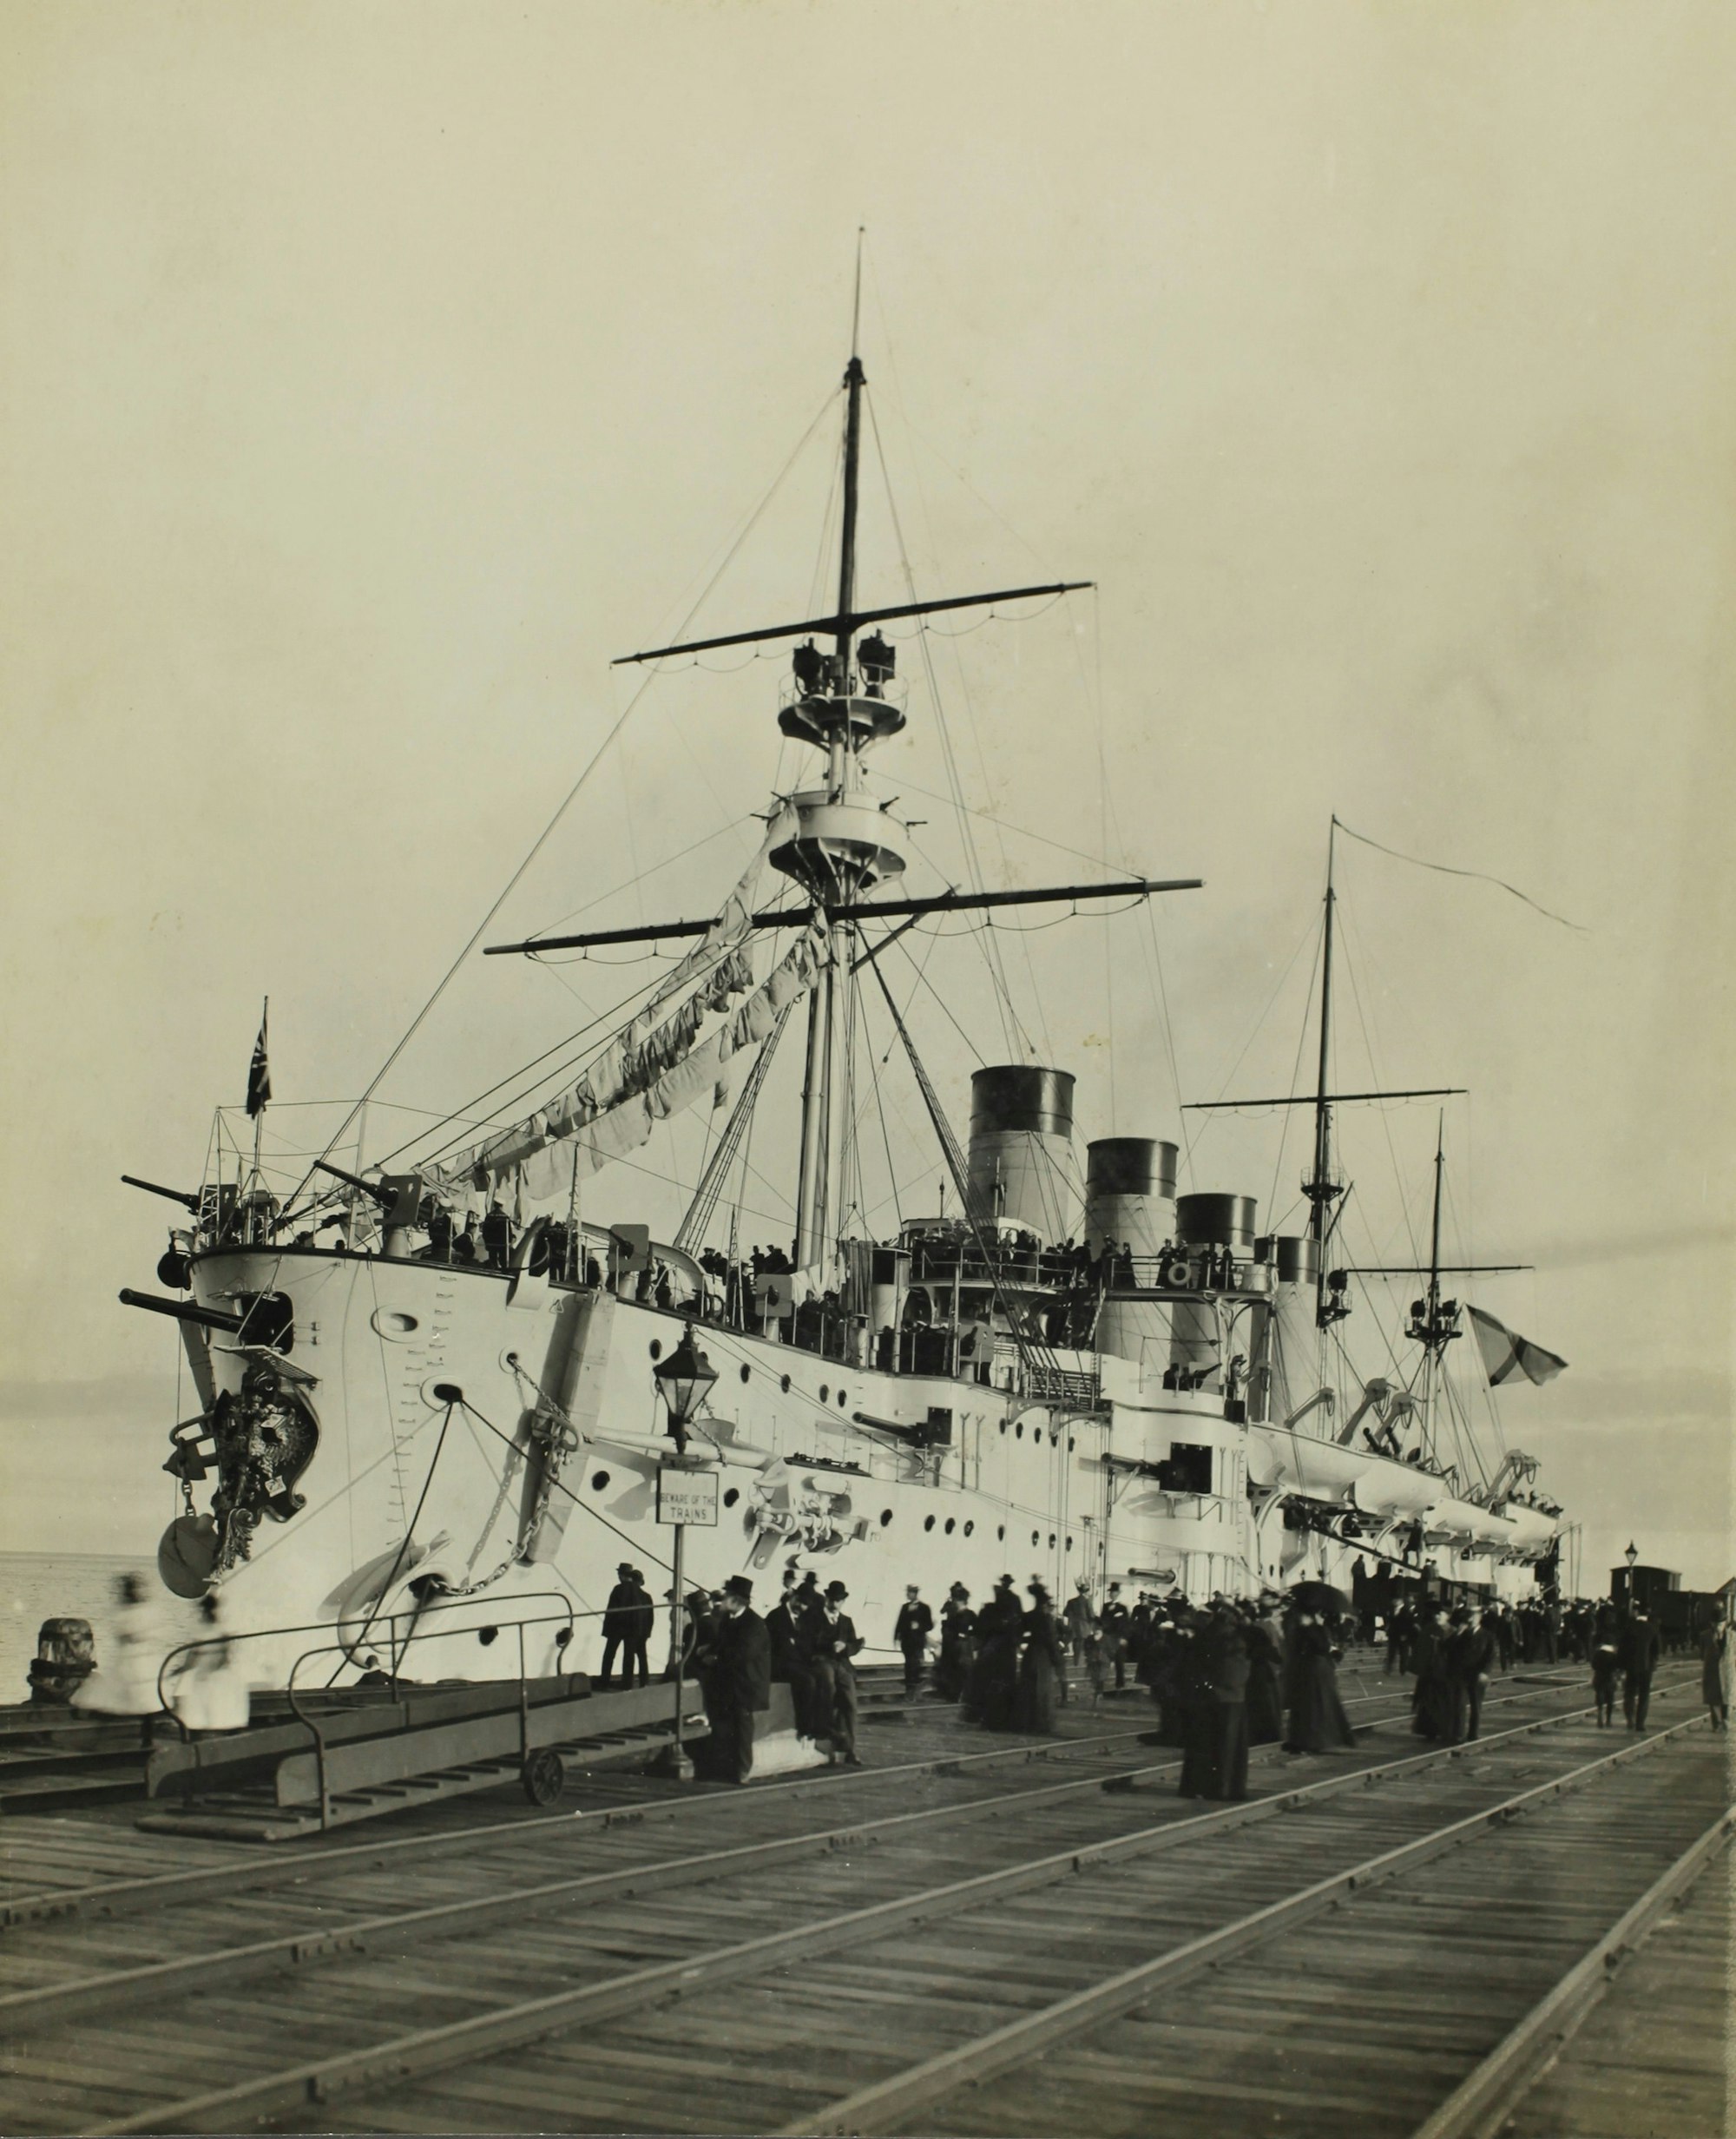 Federation Celebrations, 'The Russian Cruiser Cromoboi Lying at Port Melbourne Railway Pier', Melbourne, May1901